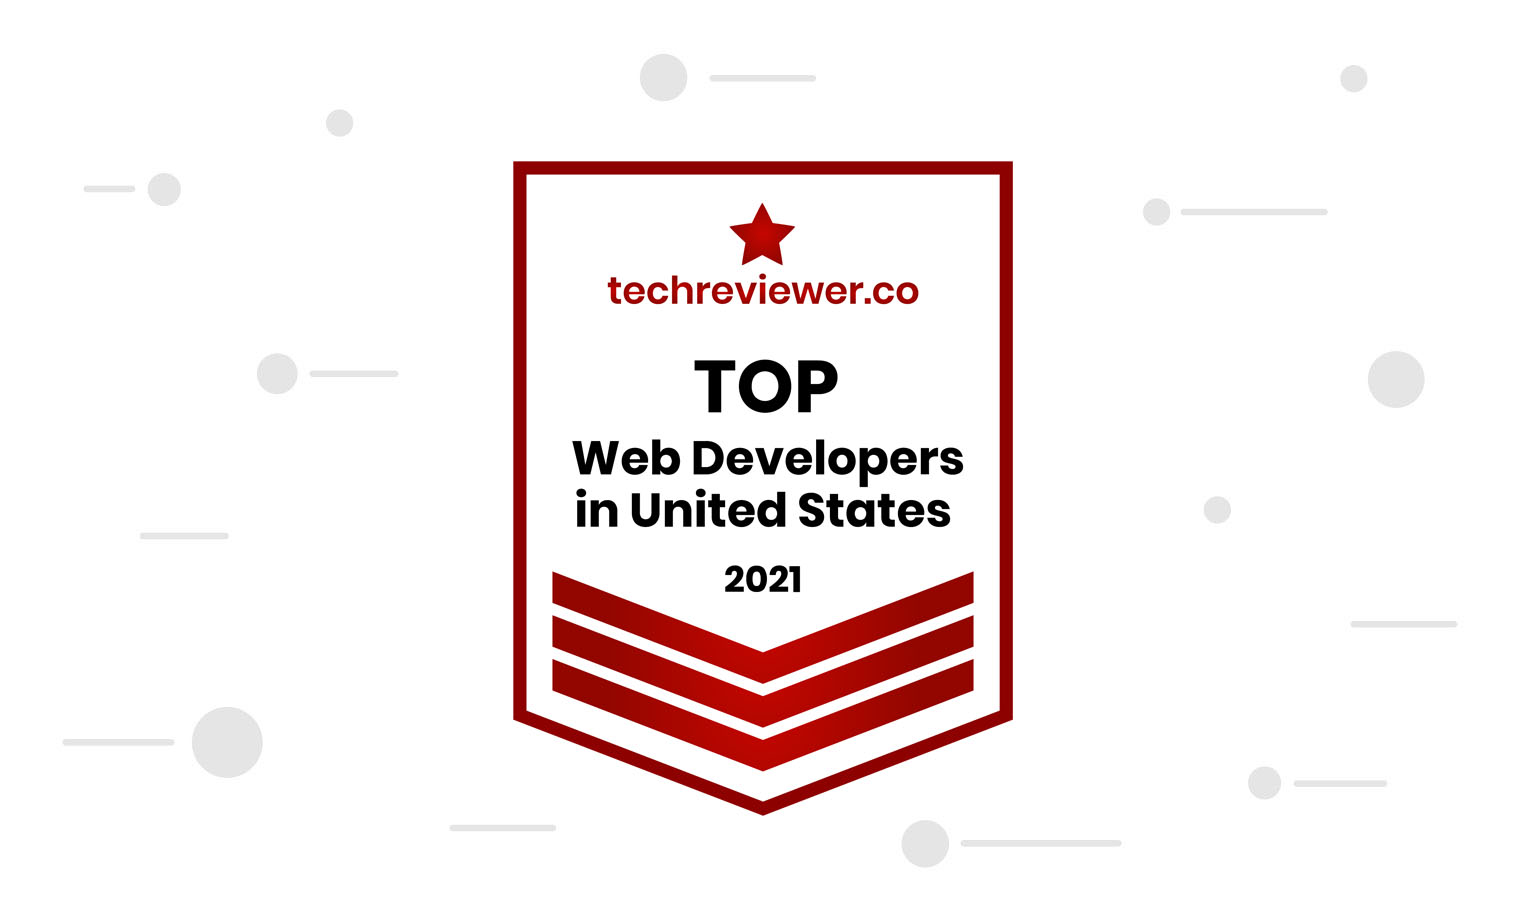 Blue Flame Thinking Named to List of 2021 Top Web & App Development Companies in the U.S.